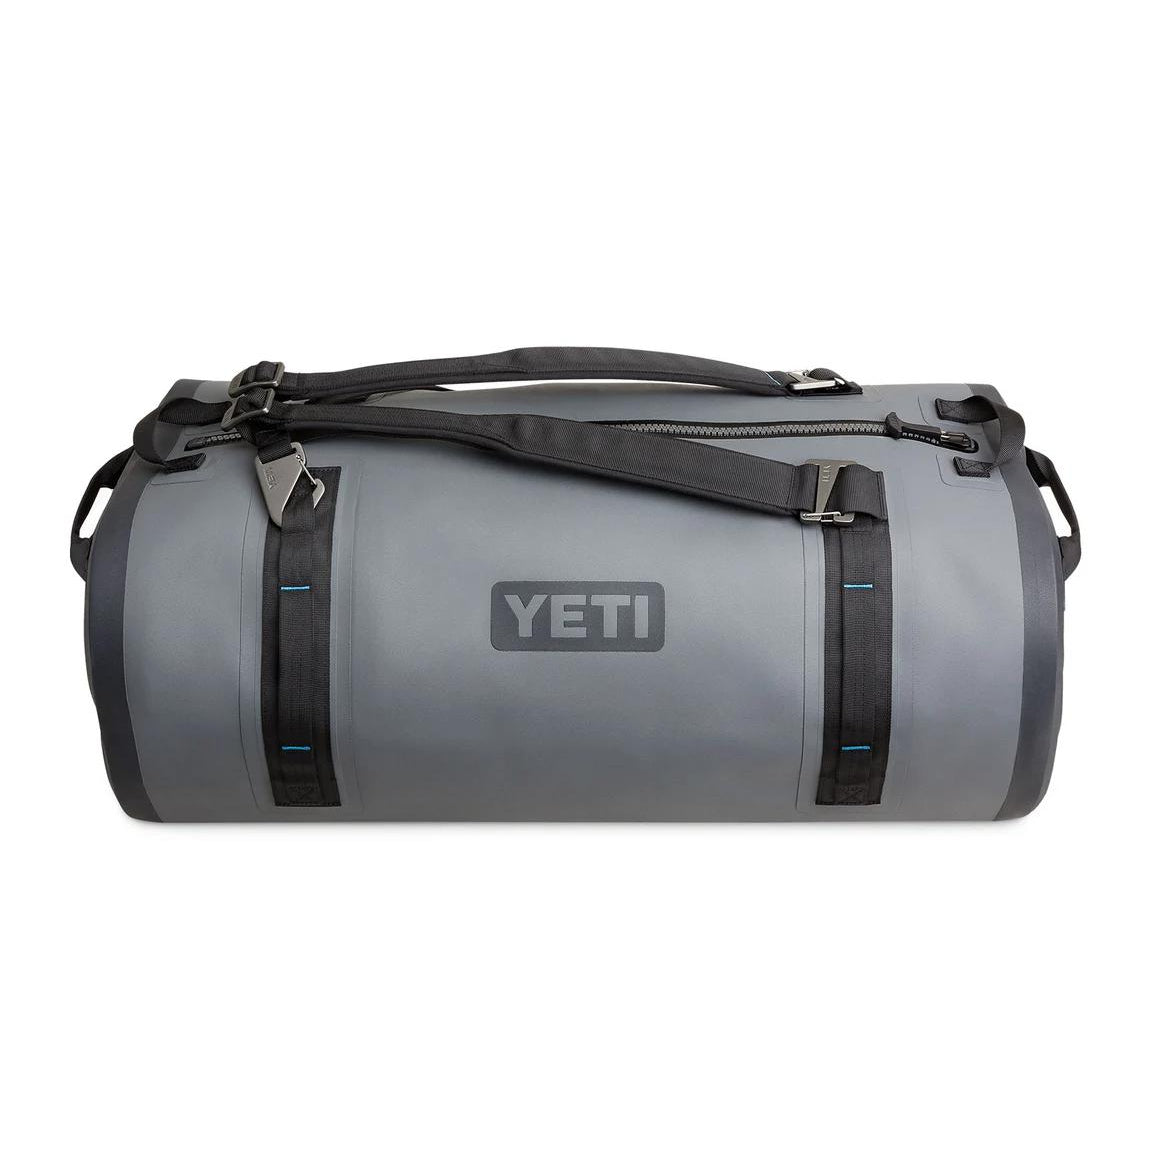 Yeti Panga 75 Submersible Duffle Bag-HUNTING/OUTDOORS-Kevin's Fine Outdoor Gear & Apparel